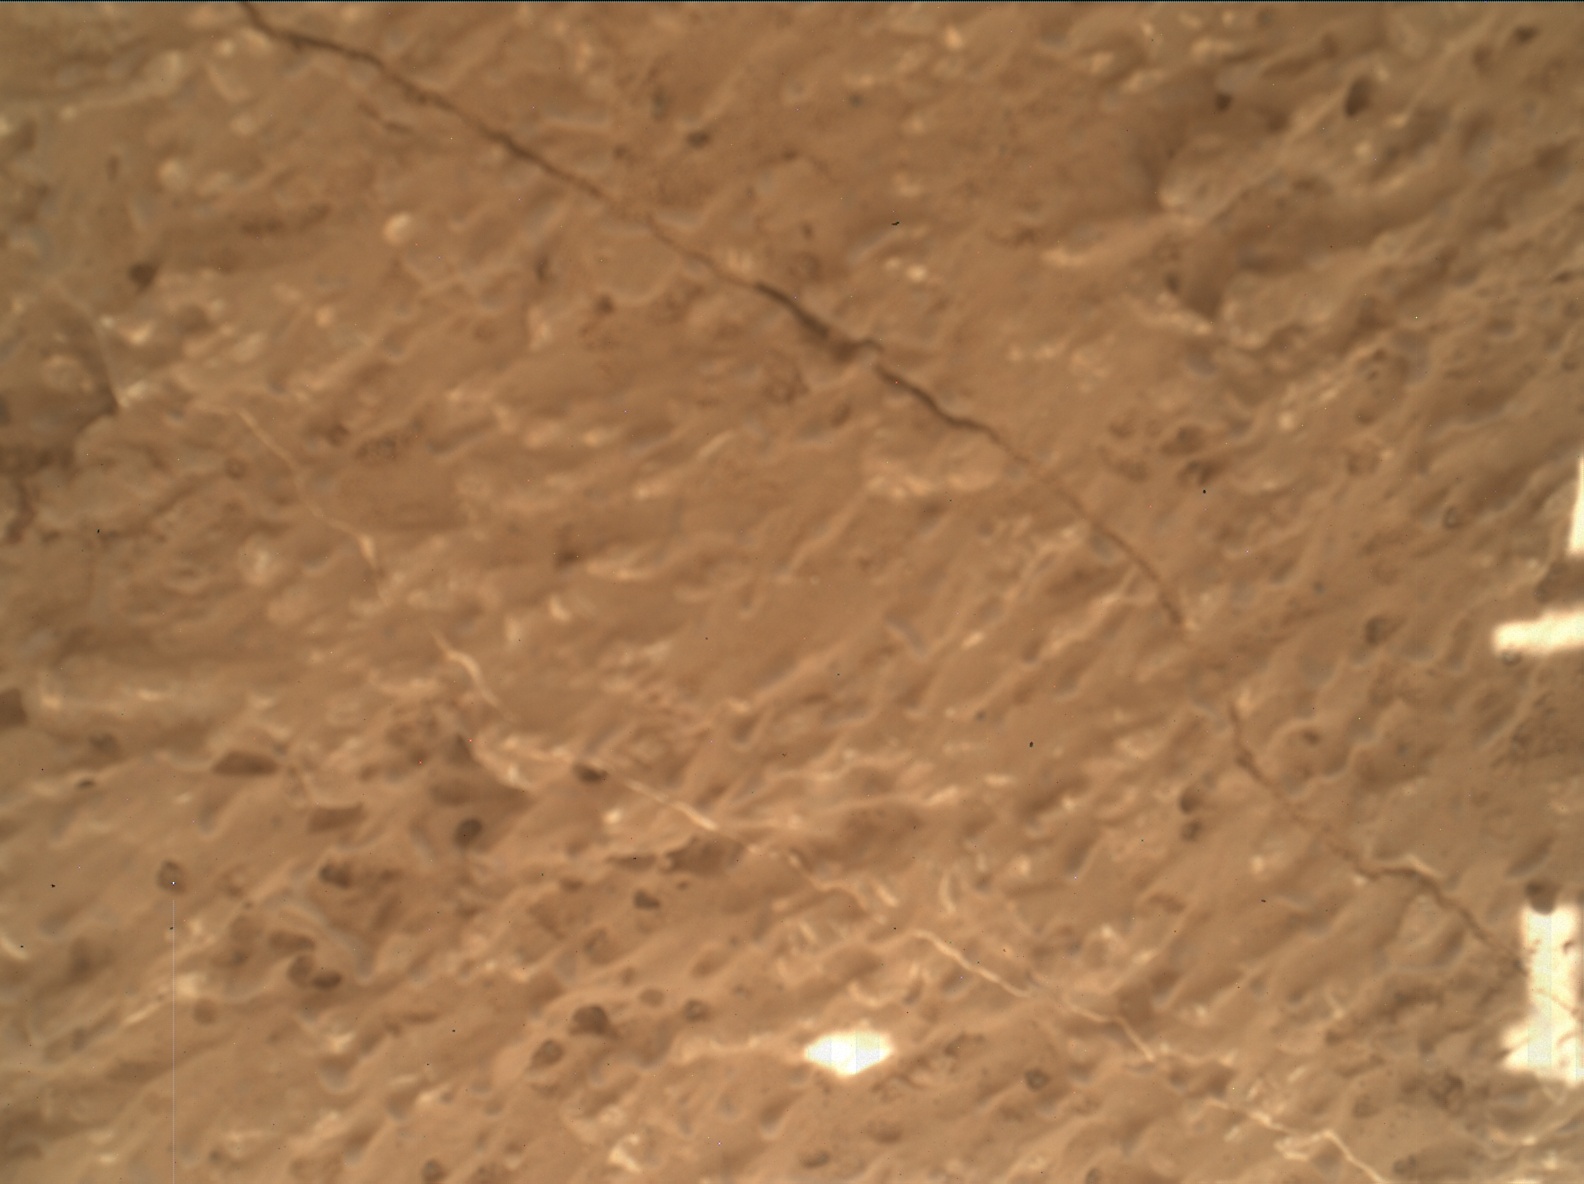 Nasa's Mars rover Curiosity acquired this image using its Mars Hand Lens Imager (MAHLI) on Sol 3219